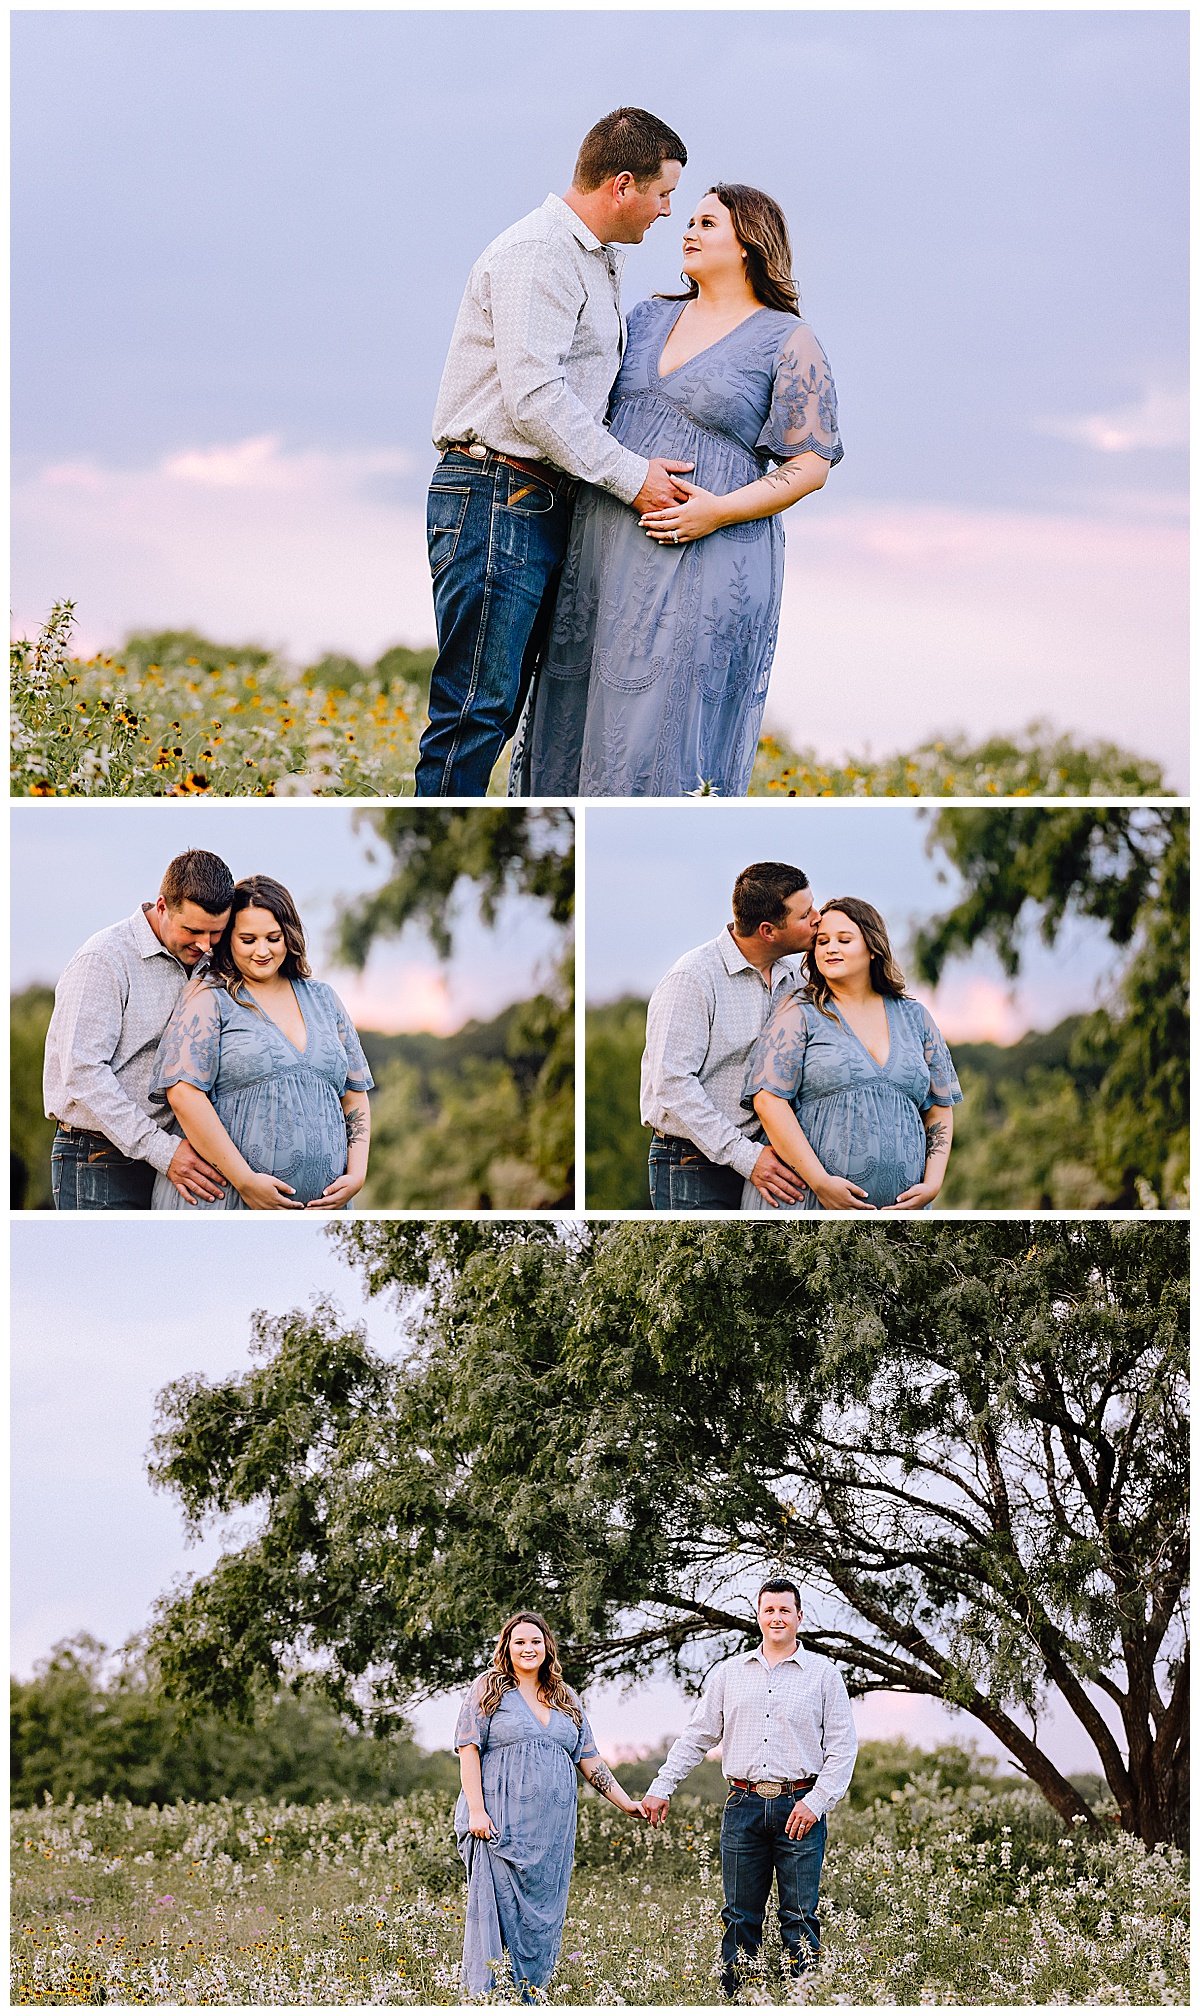 Rustic-Maternity-Session-Texas-Sunset-Carly-Barton-Photography_0070.jpg